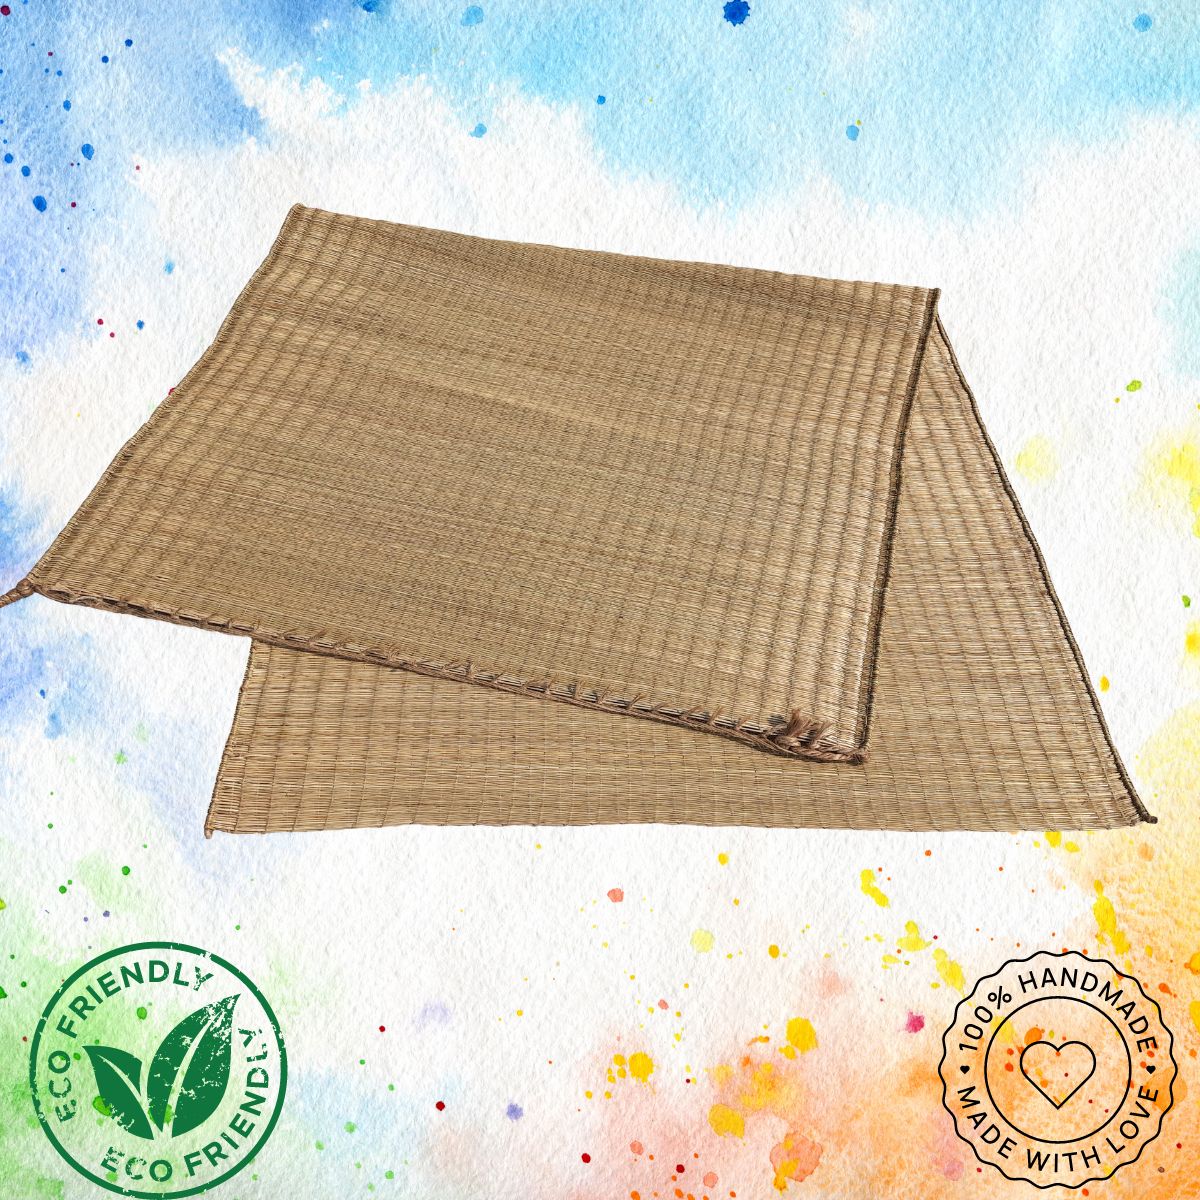 MONTISA chatai mats for home made of Madurkathi Grass, Handwoven, Organic with Natural Border - T2